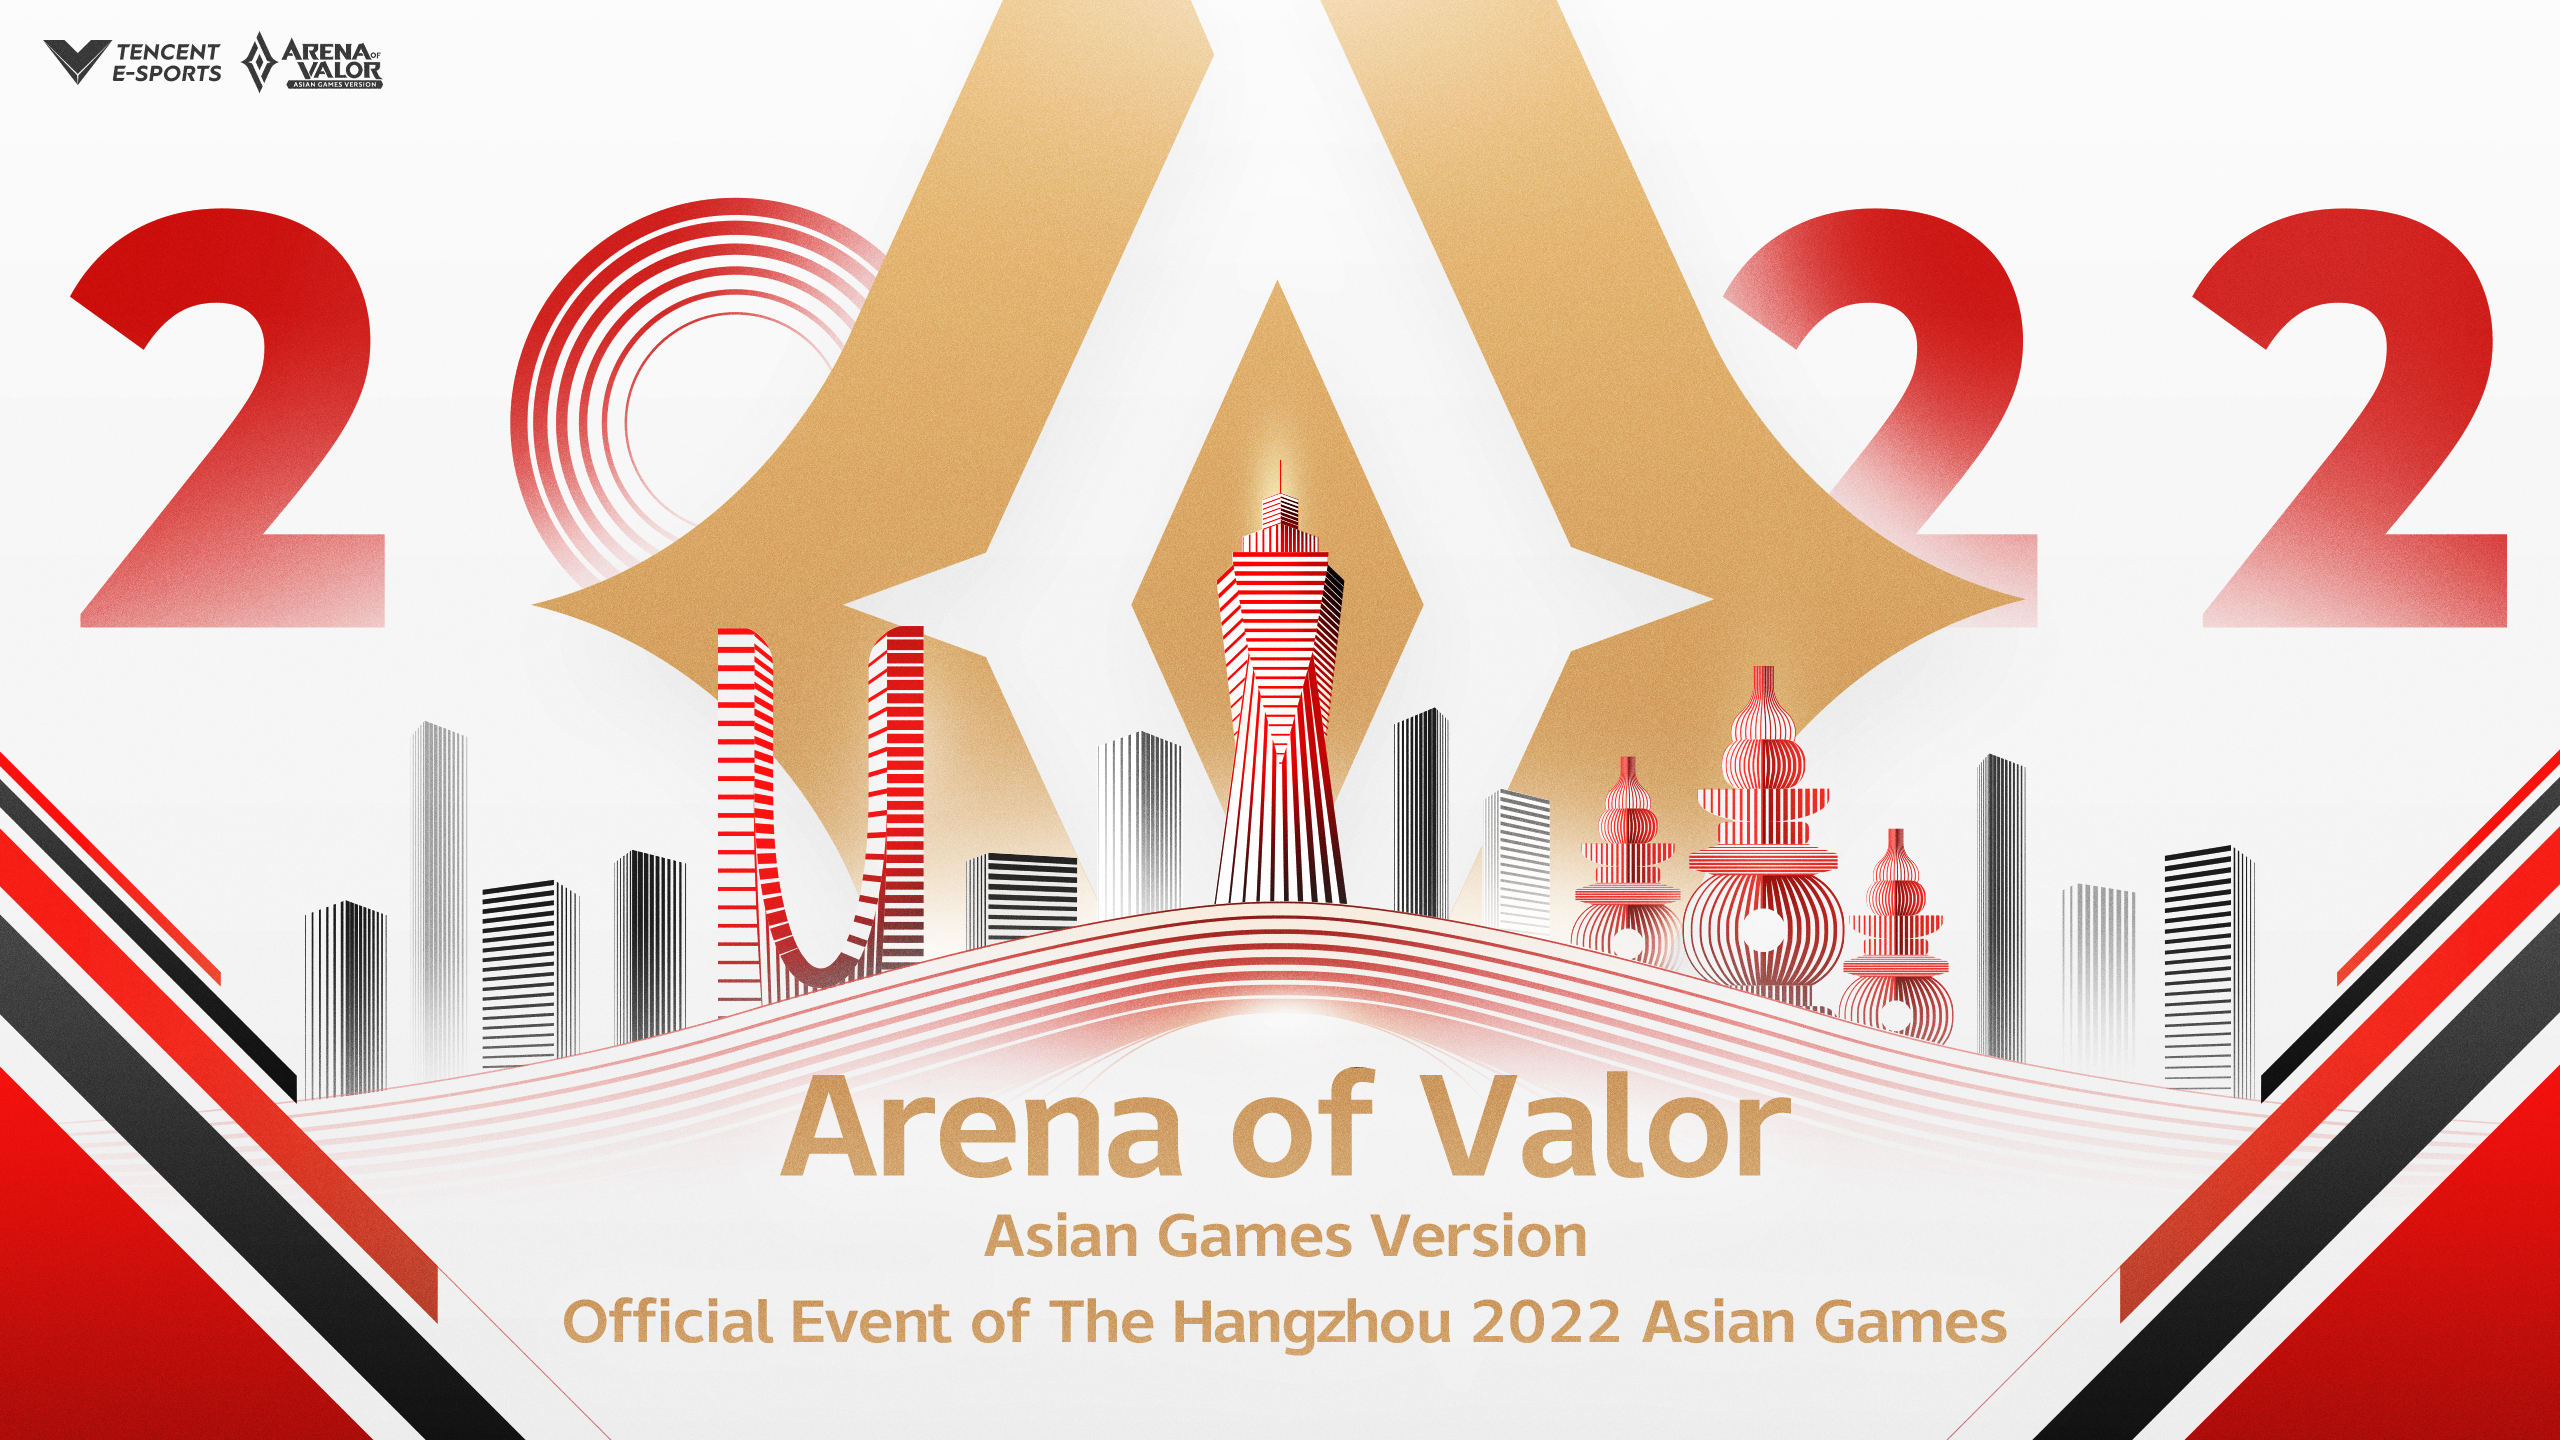 AoV Games Version Named Official Event at The Hangzhou 2022 Asian Games